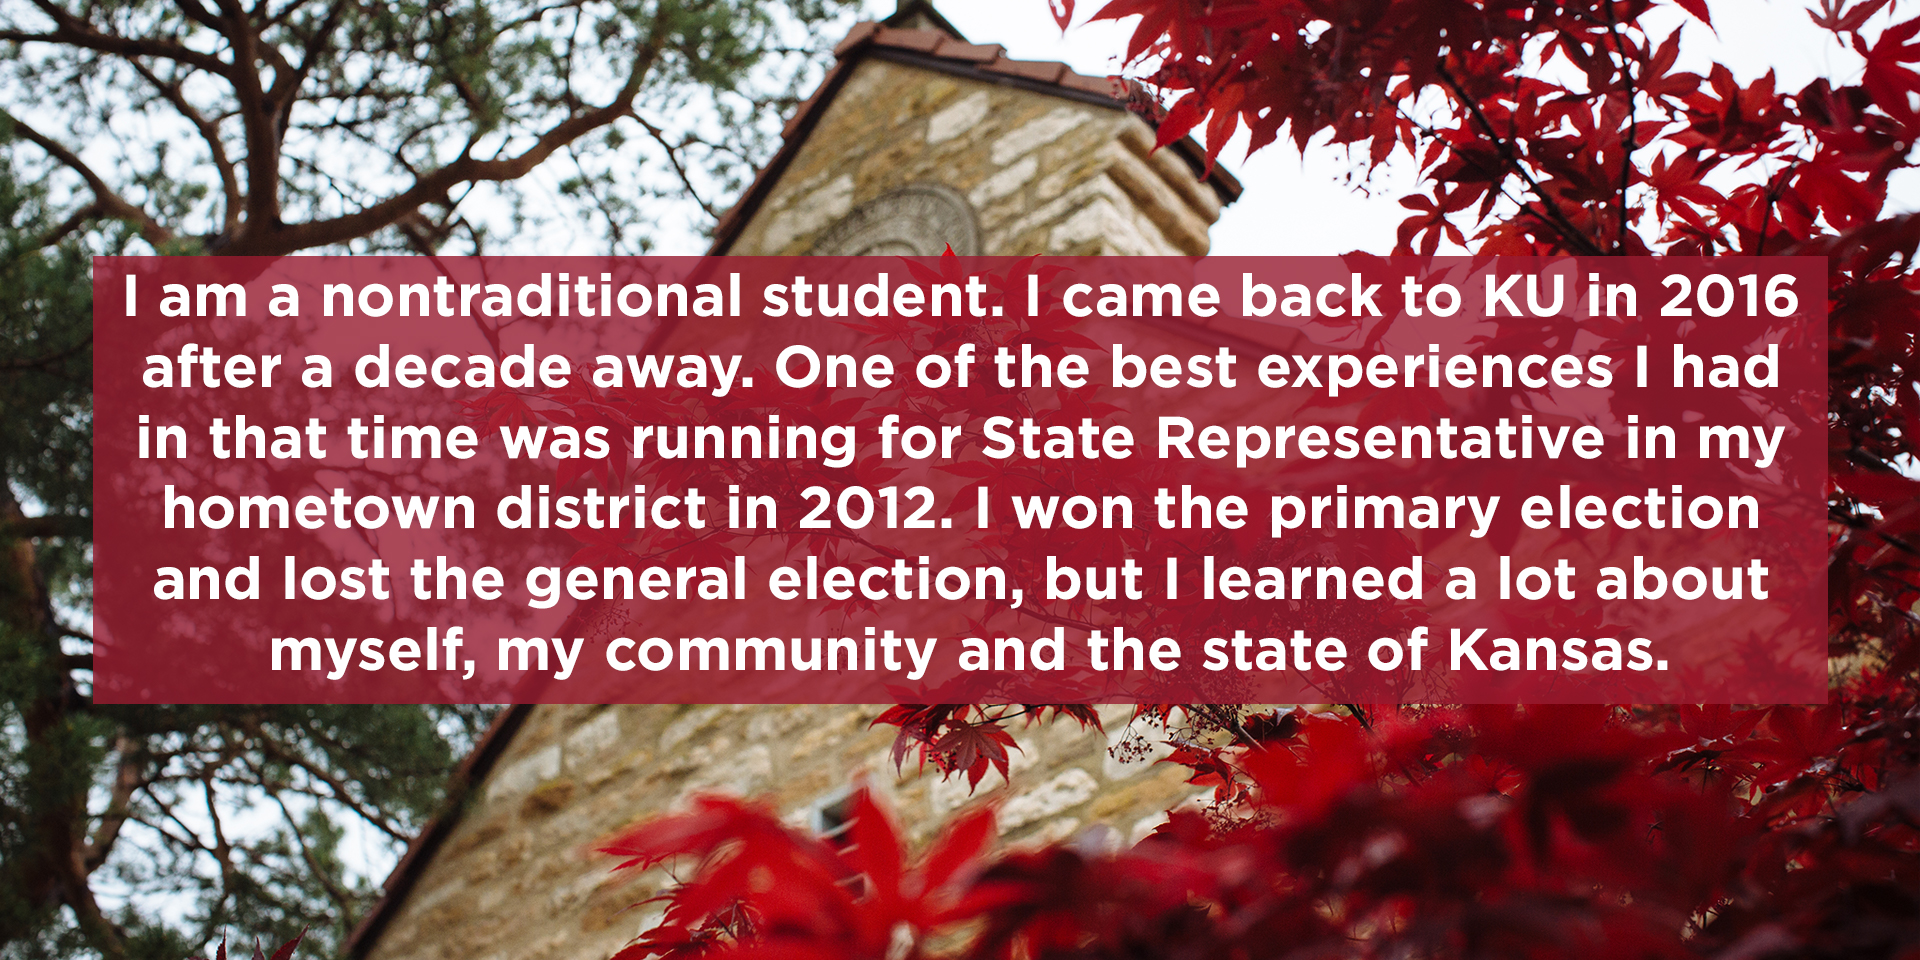 I am a nontraditional student. I came back to KU in 2016 after a decade away. One of the best experiences I had in that time was running for State Representative in my hometown district in 2012. I won the primary election and lost the general election, but I learned a lot about myself, my community and the state of Kansas.